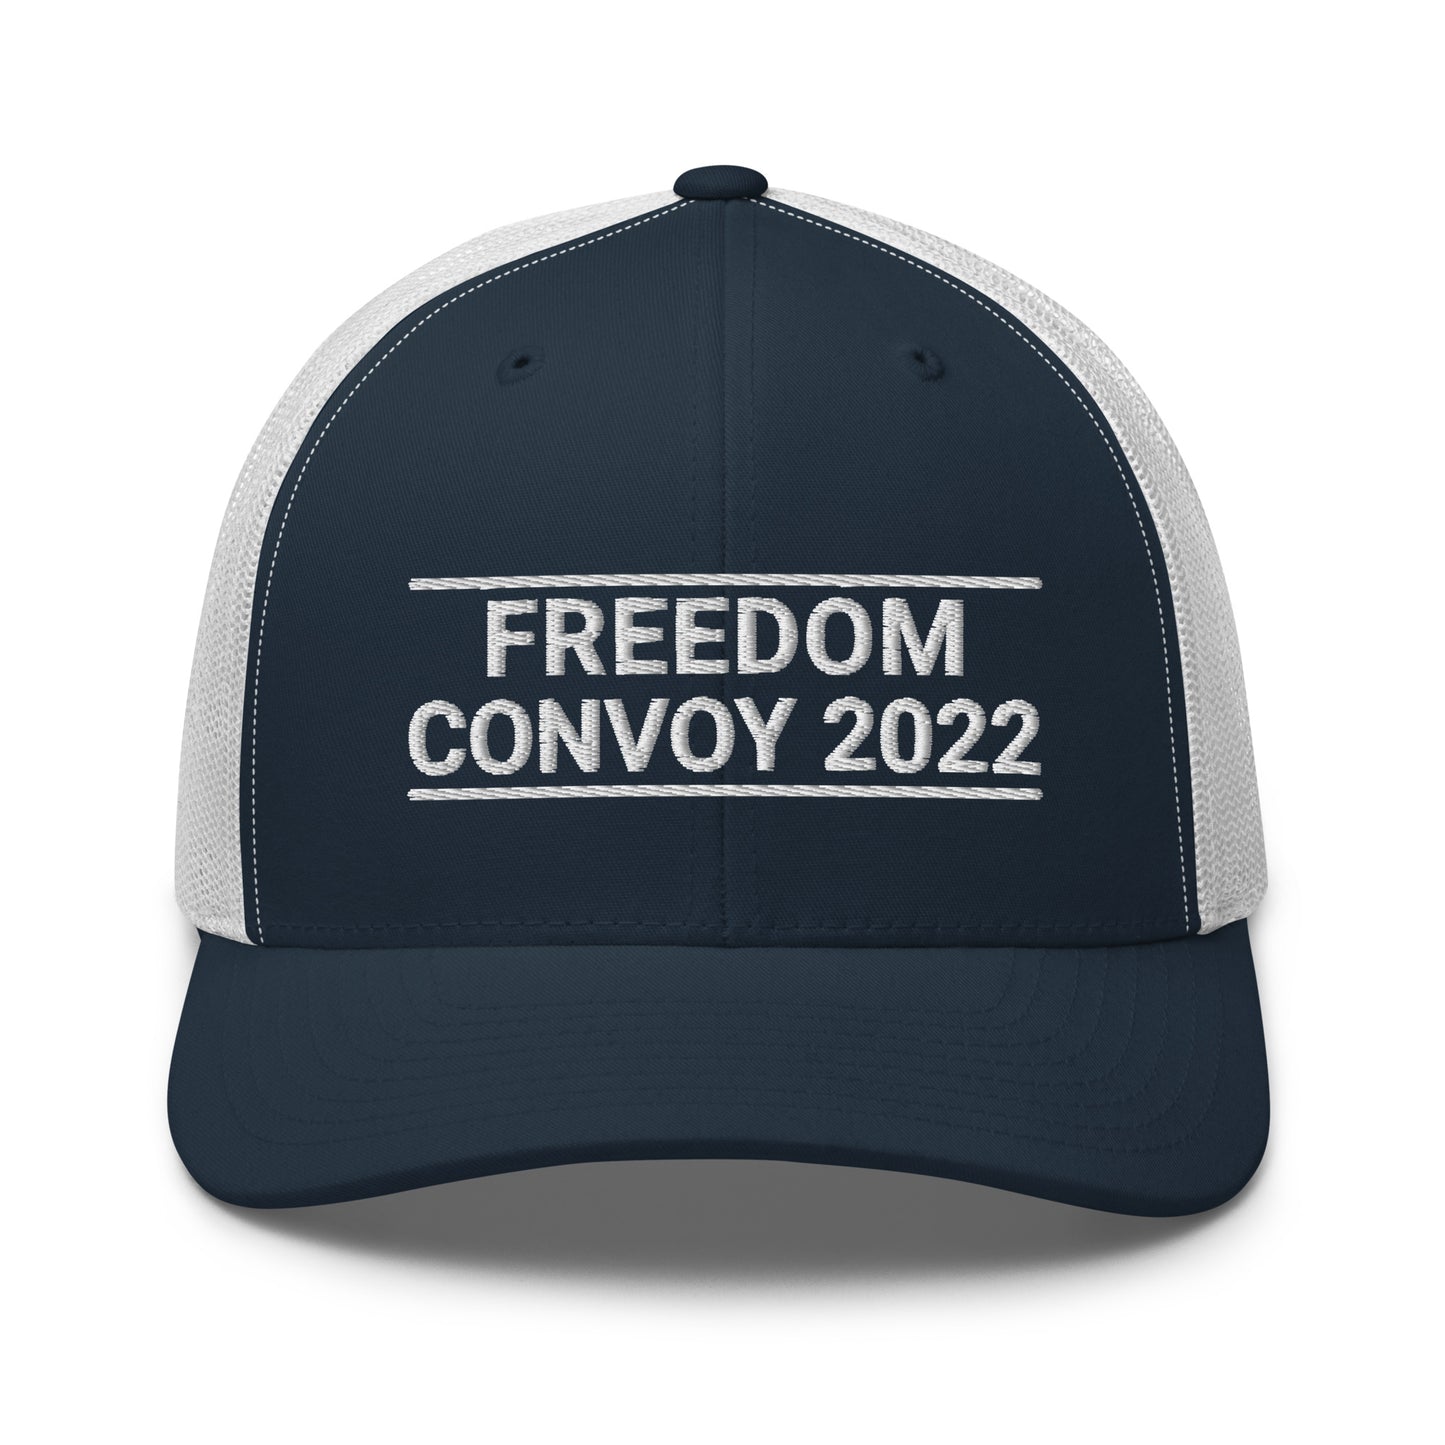 Freedom Convoy 2022 Yupoong 6606 blue and white hat.